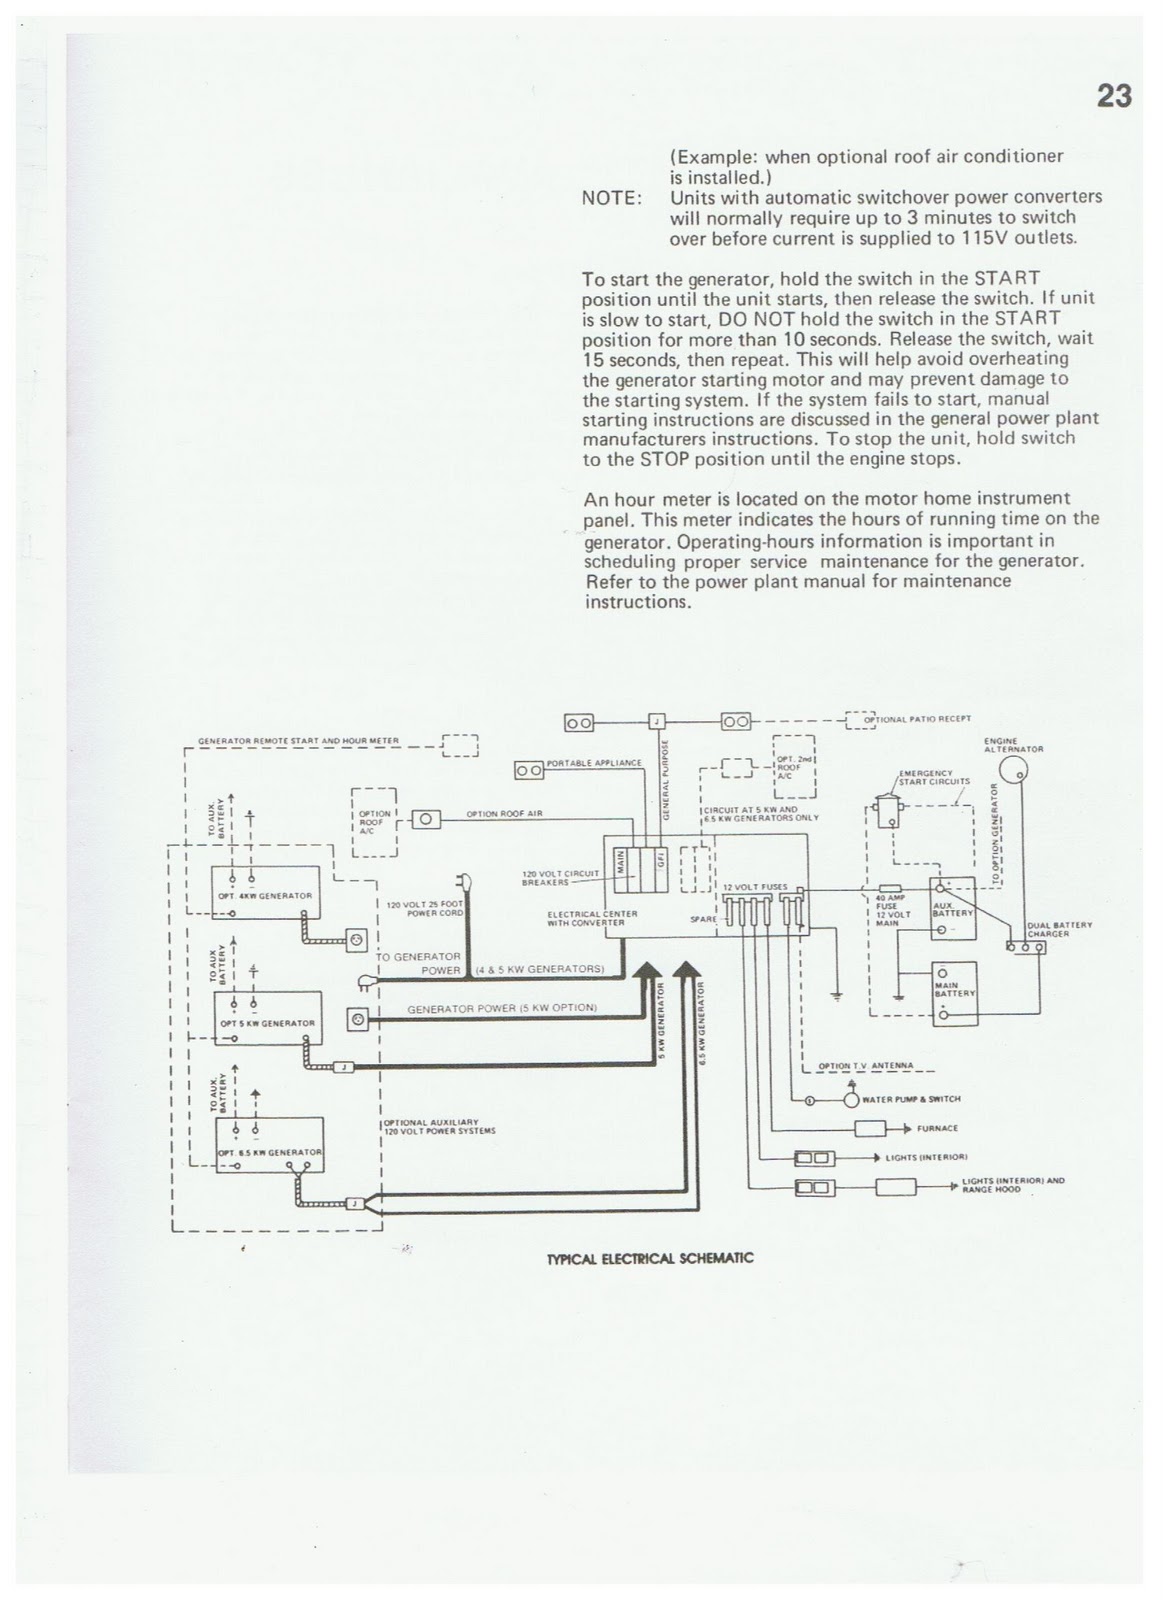 1983 Fleetwood Pace Arrow Owners Manuals: 1983 Fleetwood Pace Arrow Owners  Manual  Fleetwood Pace Arrow Refridgerator Wiring Diagrams Pdf Free Download    1983 Fleetwood Pace Arrow Owners Manuals